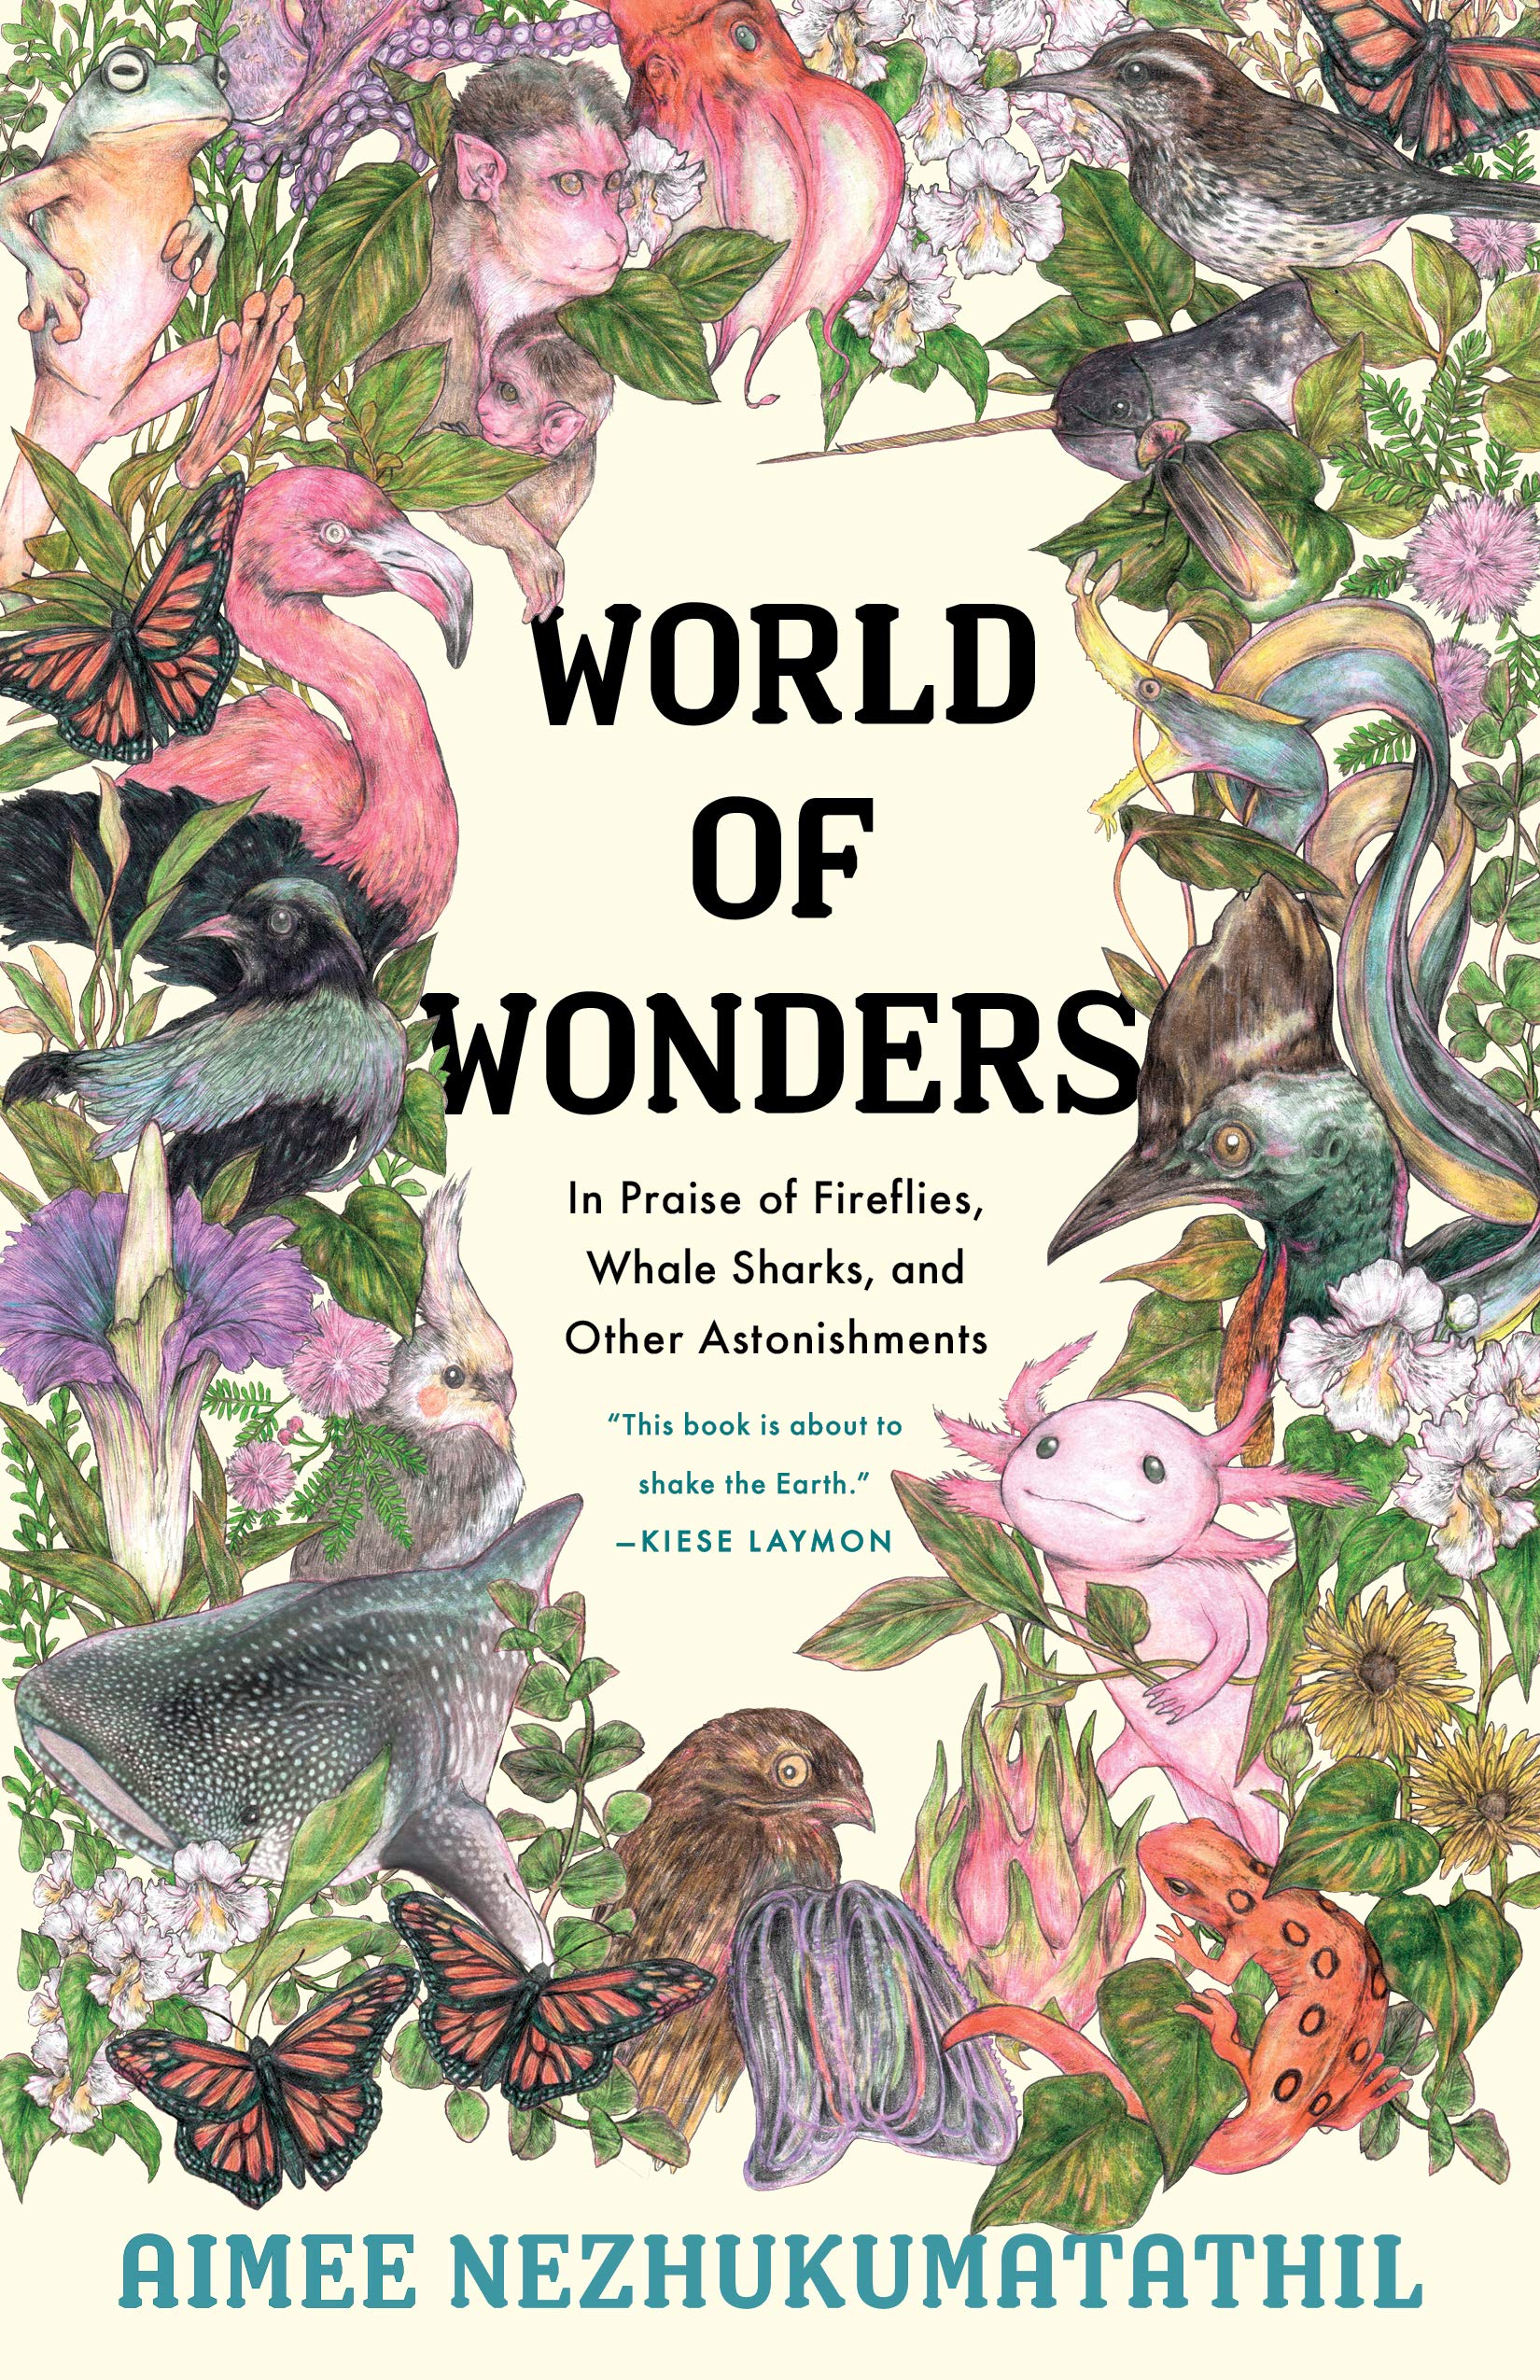 a graphic of the cover of World of Wonders: In Praise of Fireflies, Whale Sharks, and Other Astonishments by Aimee Nezhukumatathil